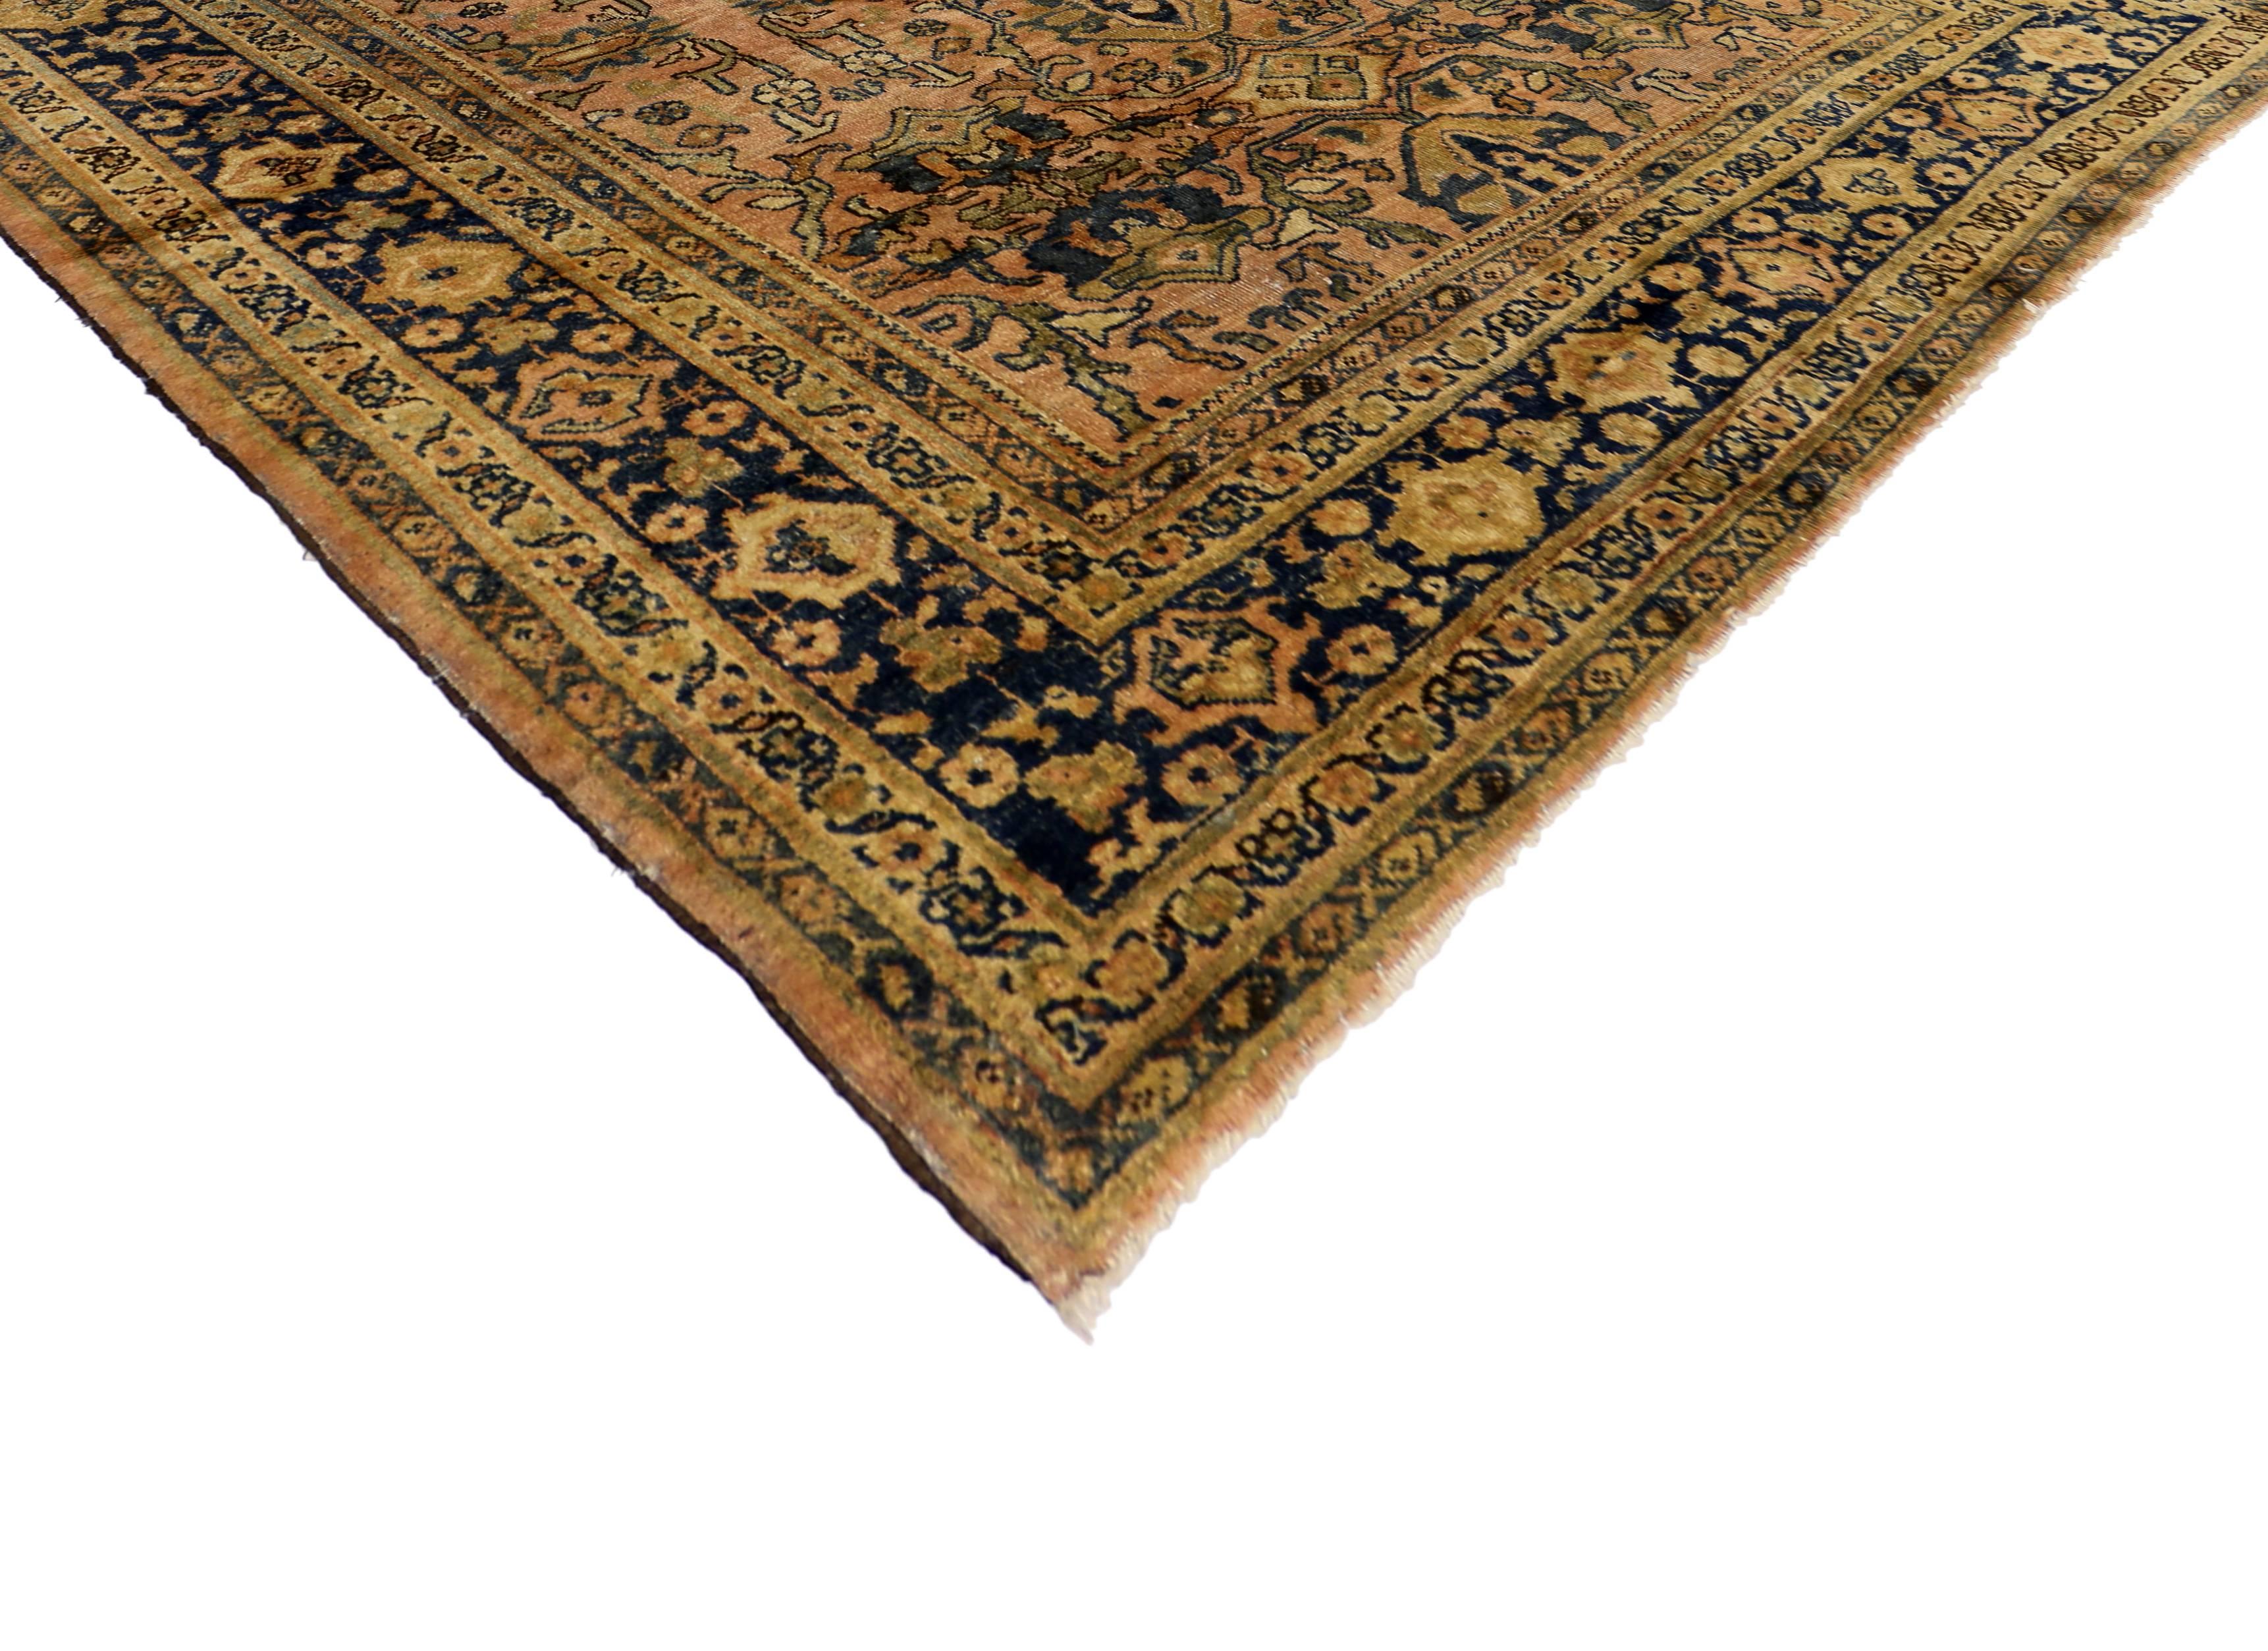 Highly cultivated in design, this vintage Mahal Persian rug highlights a modern traditional style. Featuring a timeless and Classic Persian design resulting in an exceptionally graceful and balanced composition. Full of character and cleverly